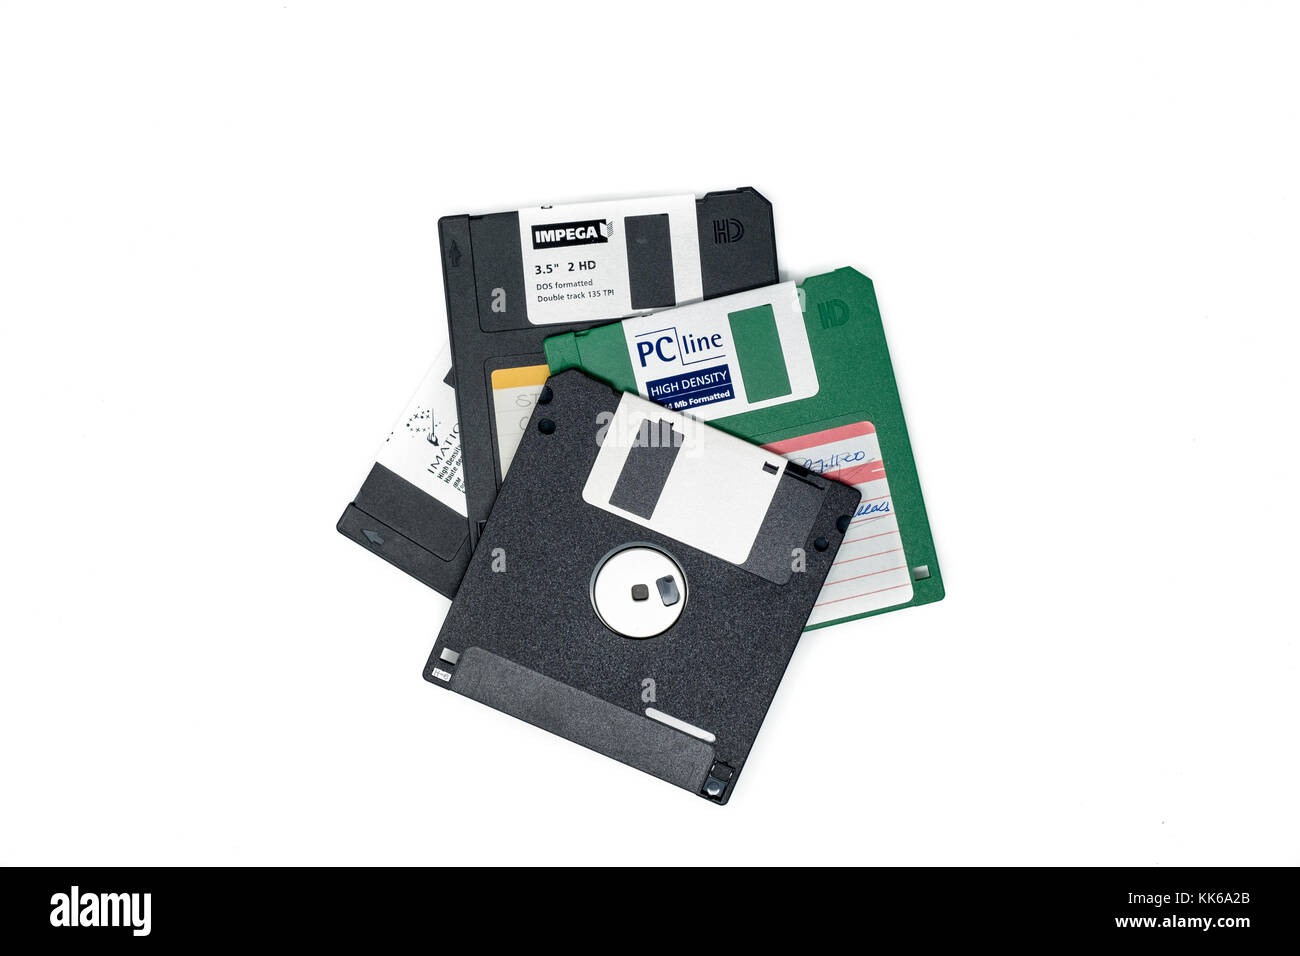 mac formatted floppy disk image